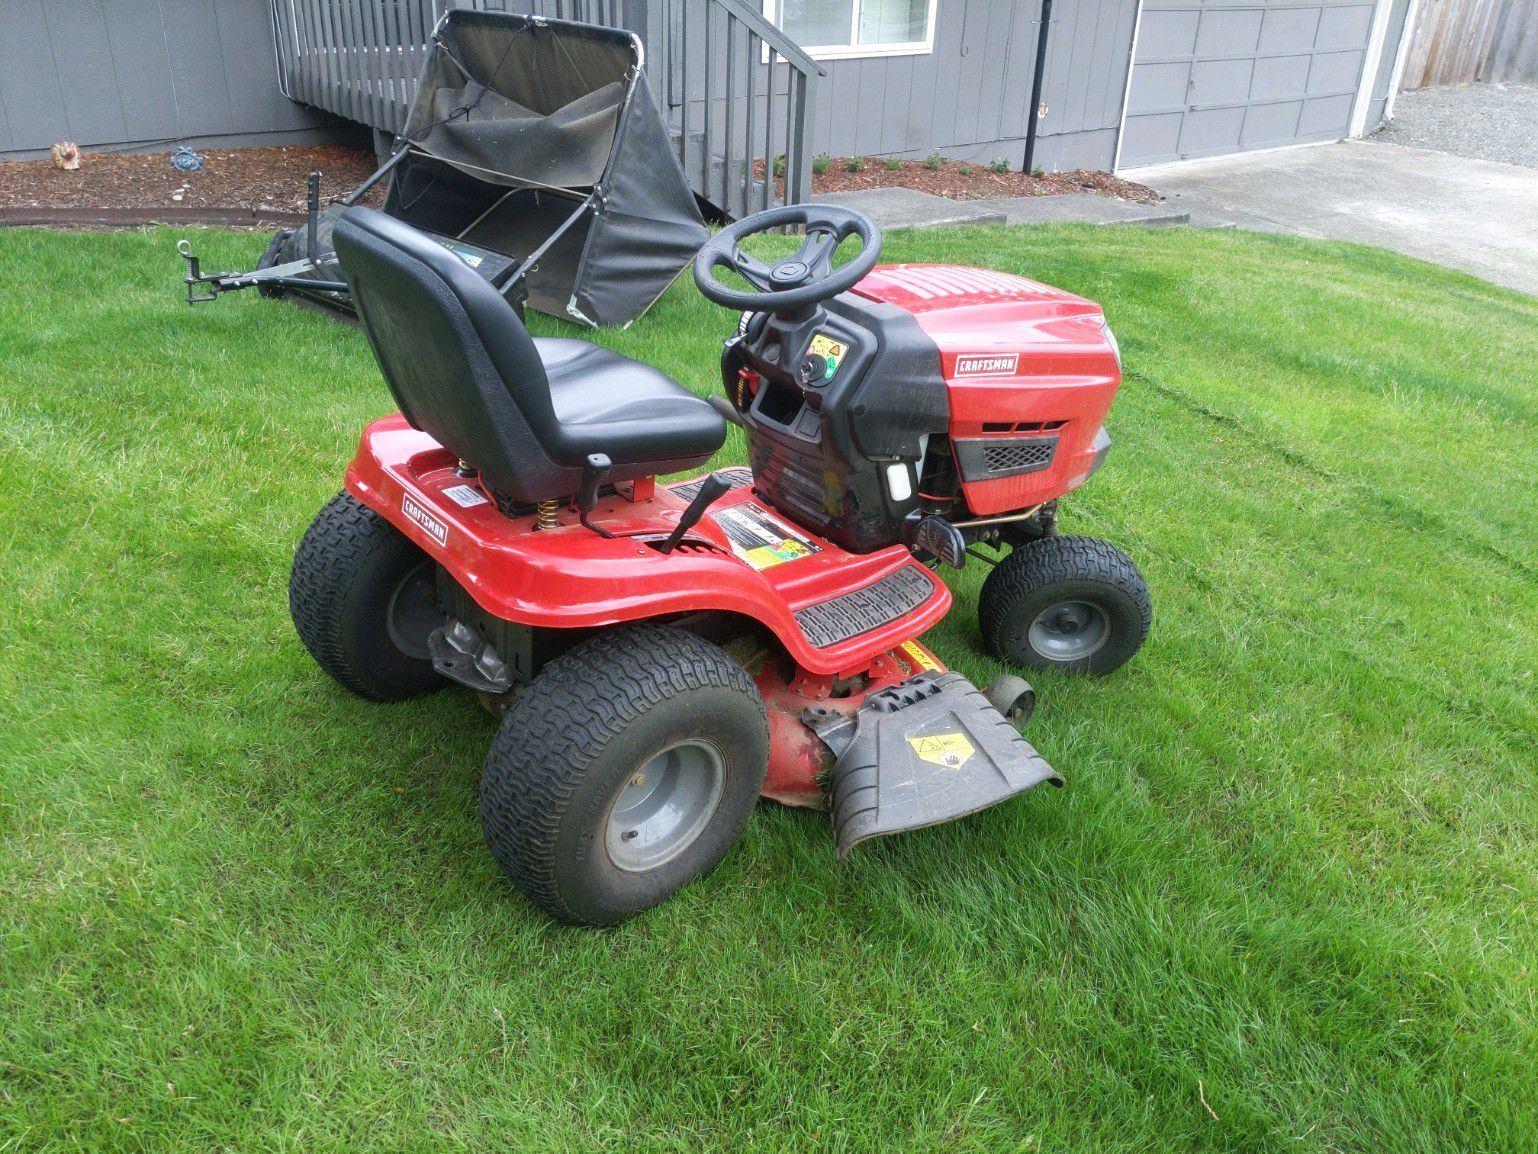 Craftsman 42" Riding Lawn Mower with Sweeper!